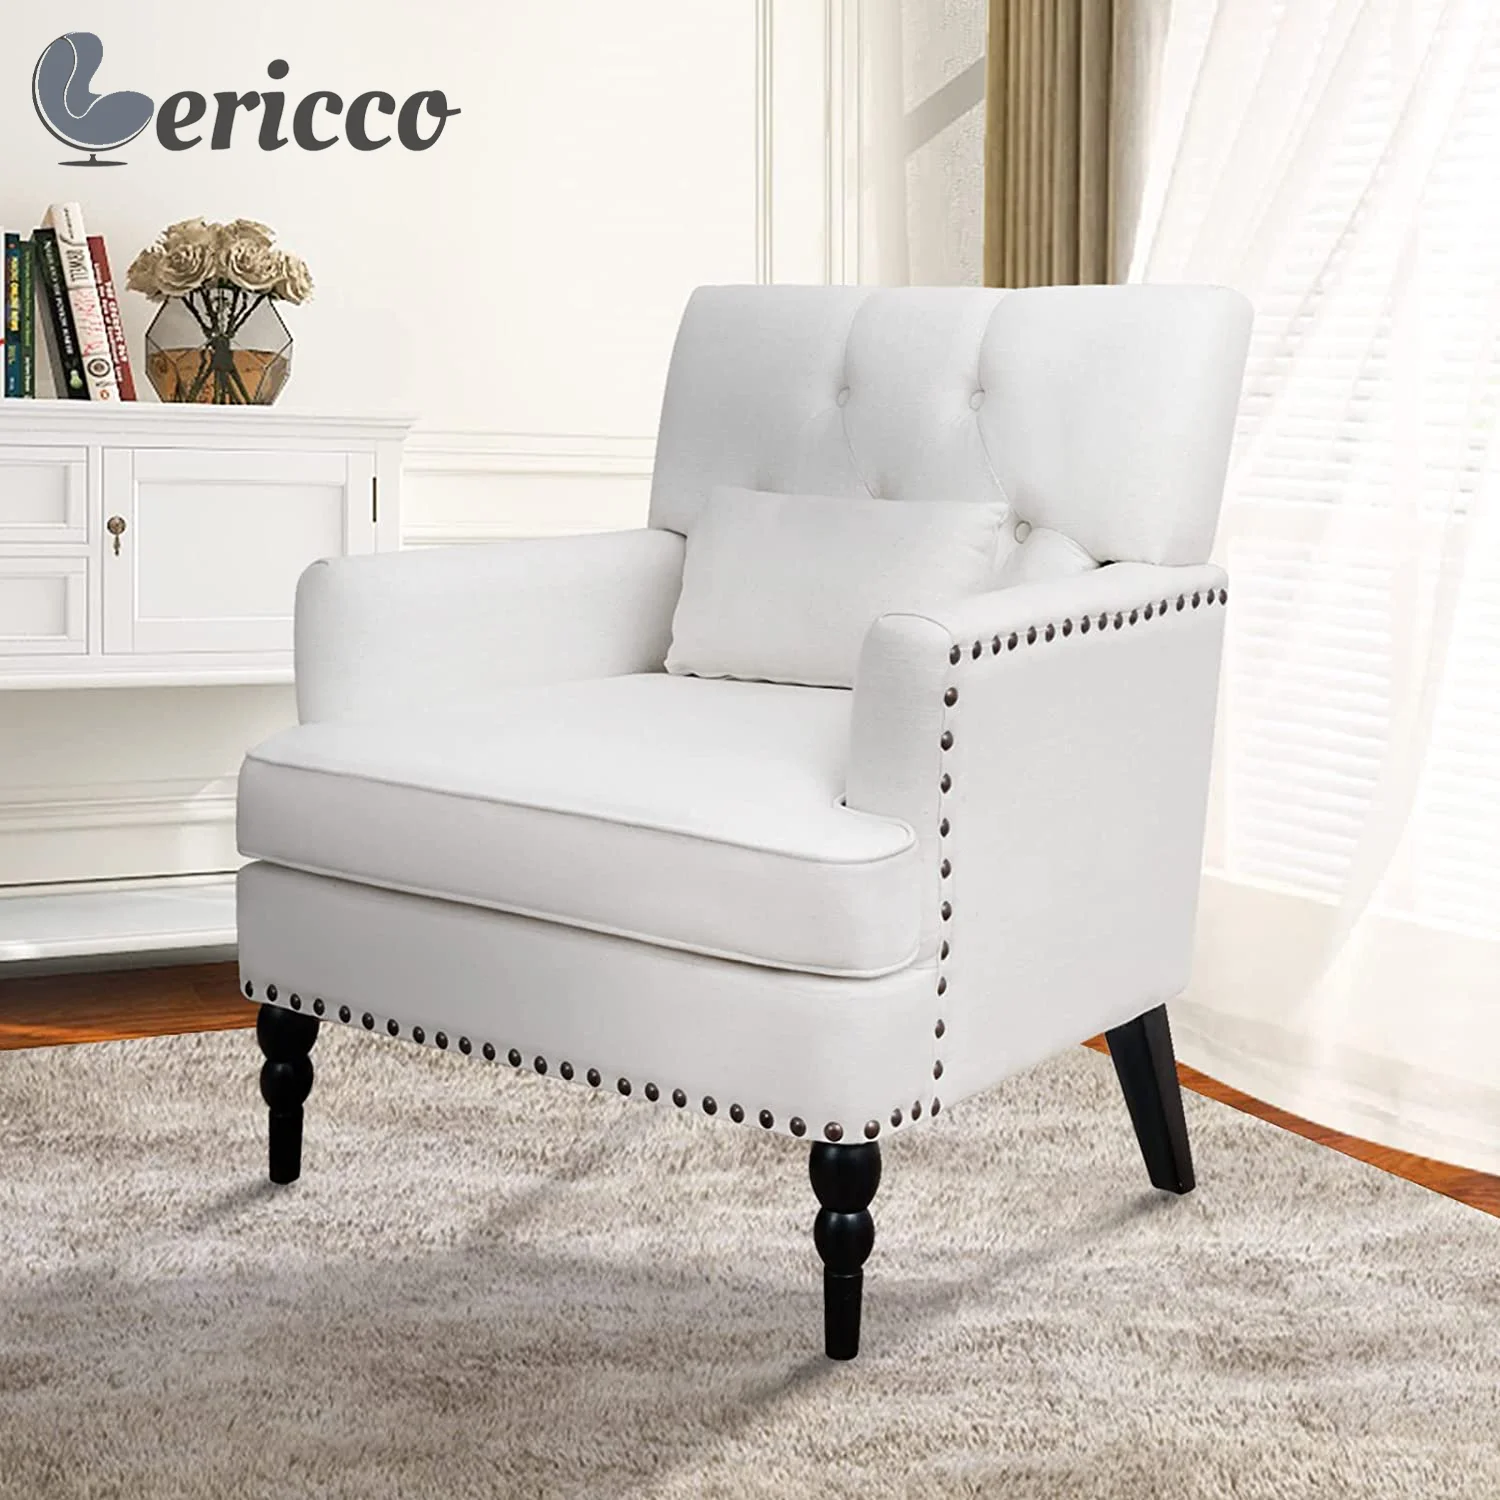 

GERICCO Accent Chair Comfy Club Chair with Pillow Modern Button Tufted Rivet Armchair Nordic Chairs for Living Room Bedroom